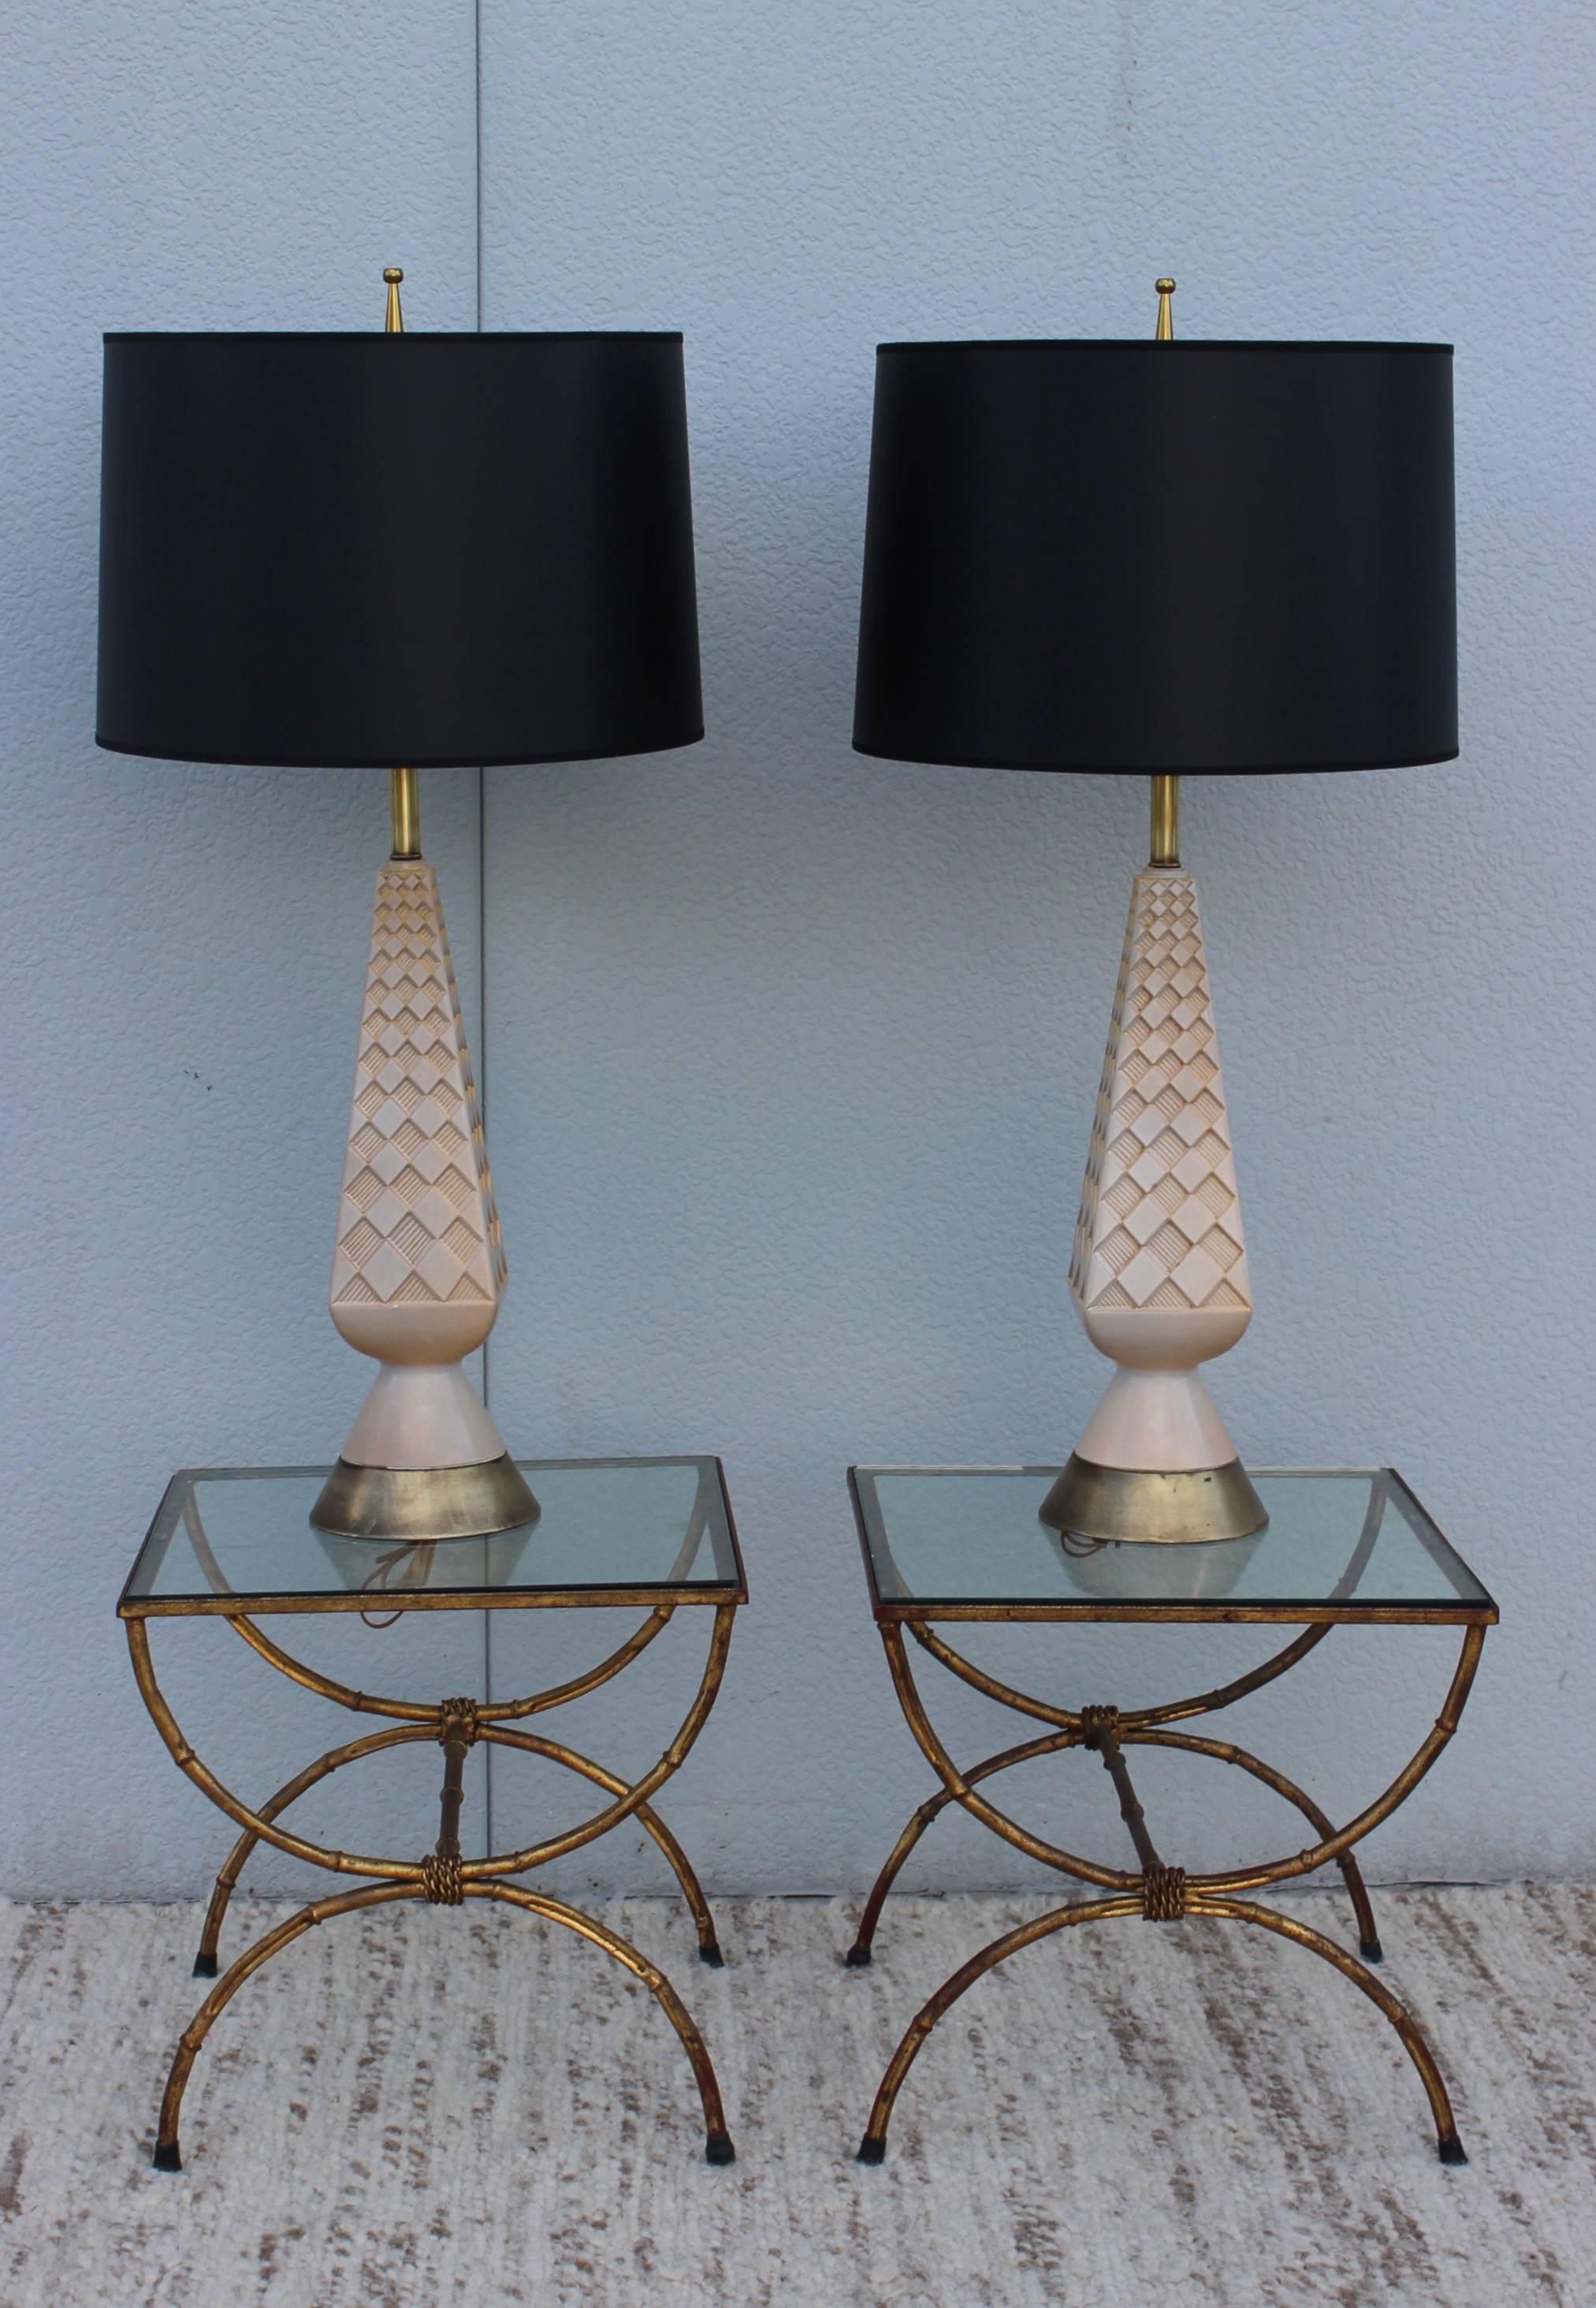 1950s Modern ceramic and brass table lamps. Newly rewired.

Shades for photography only.

Measures: Height to light socket 26''.